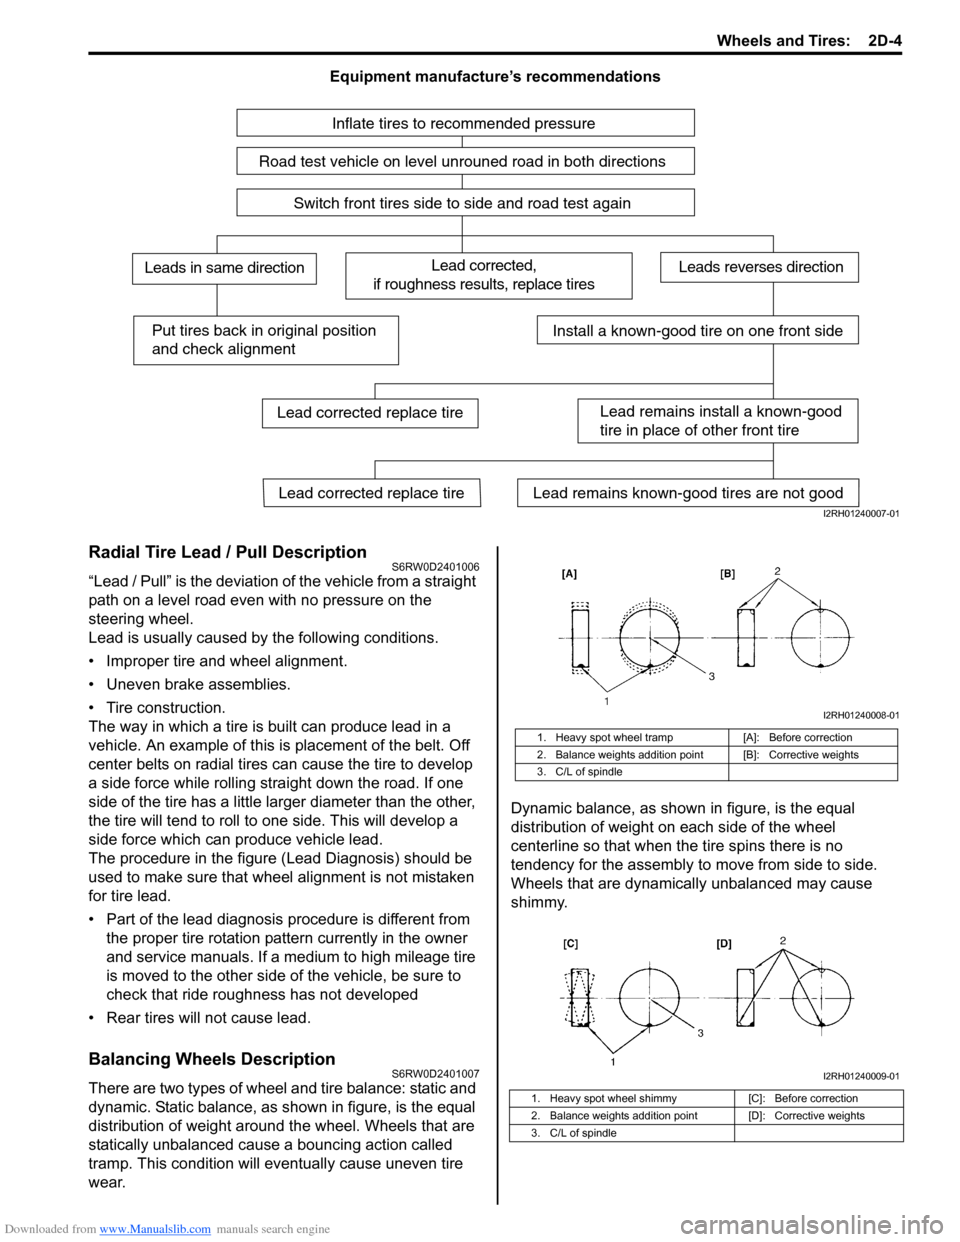 SUZUKI SX4 2006 1.G Service Workshop Manual Downloaded from www.Manualslib.com manuals search engine Wheels and Tires:  2D-4
Equipment manufacture’s recommendations
Radial Tire Lead / Pull DescriptionS6RW0D2401006
“Lead / Pull” is the dev